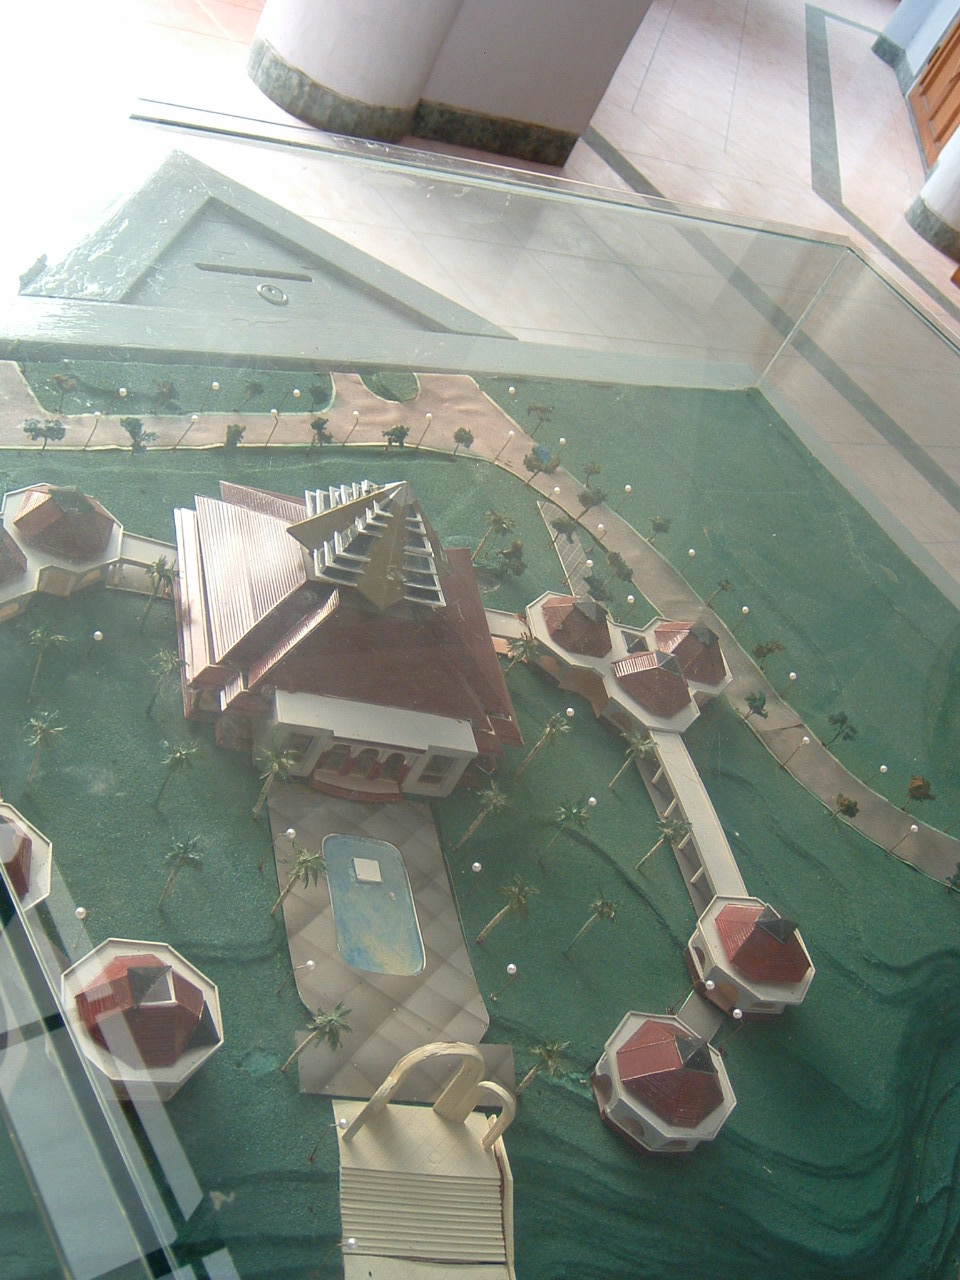 Elevated view of the mosque model